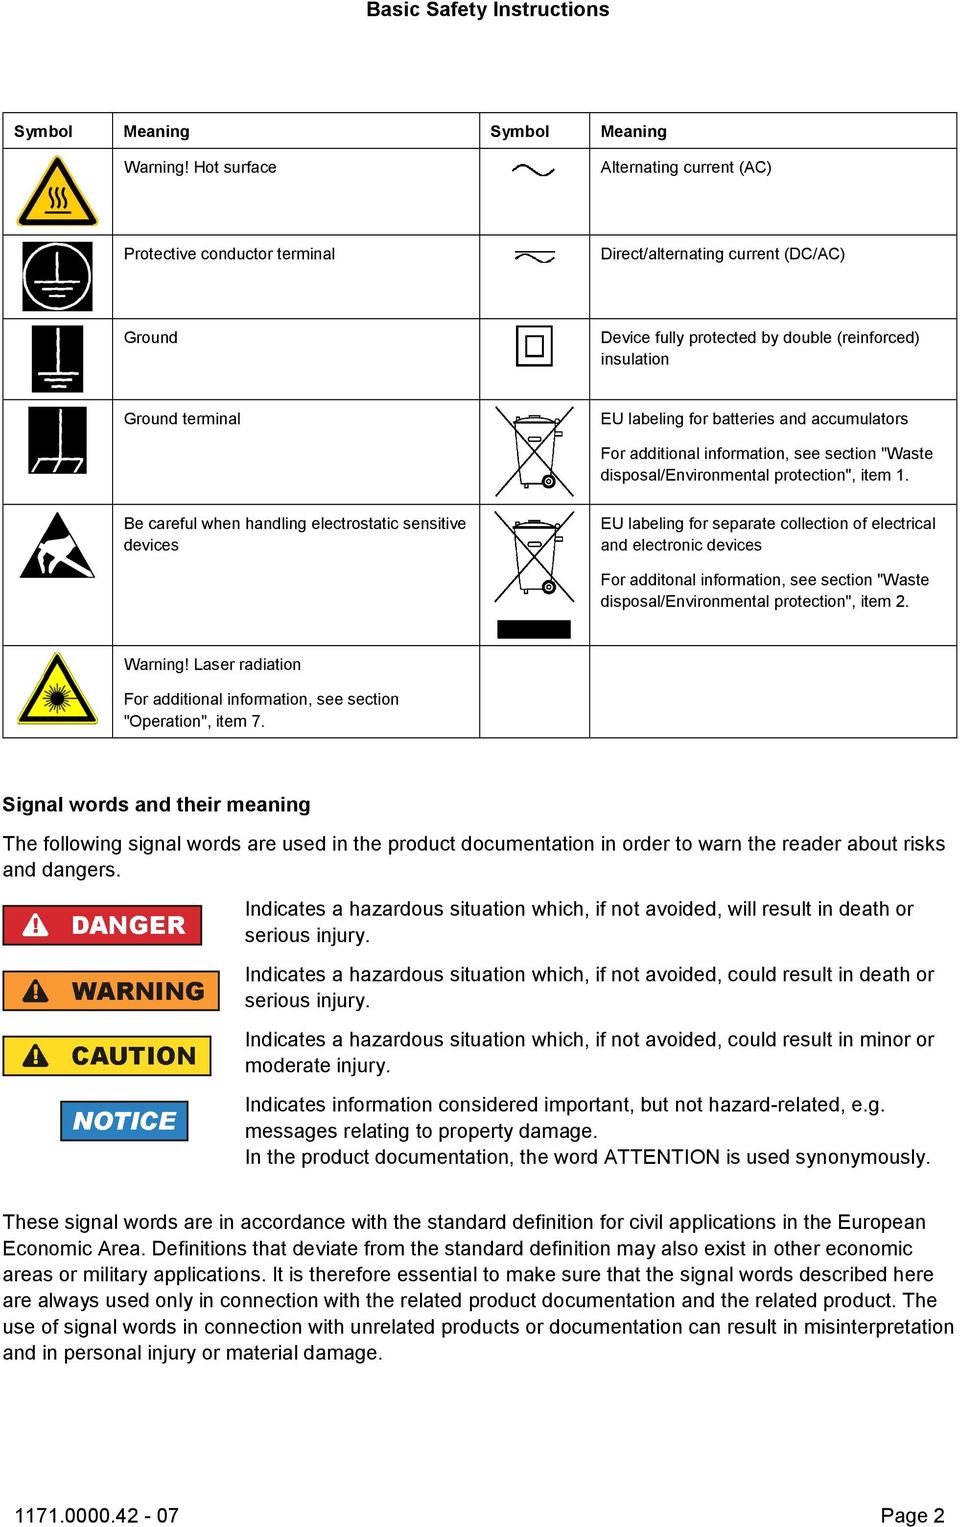 batteries and accumulators For additional information, see section "Waste disposal/environmental protection", item 1.